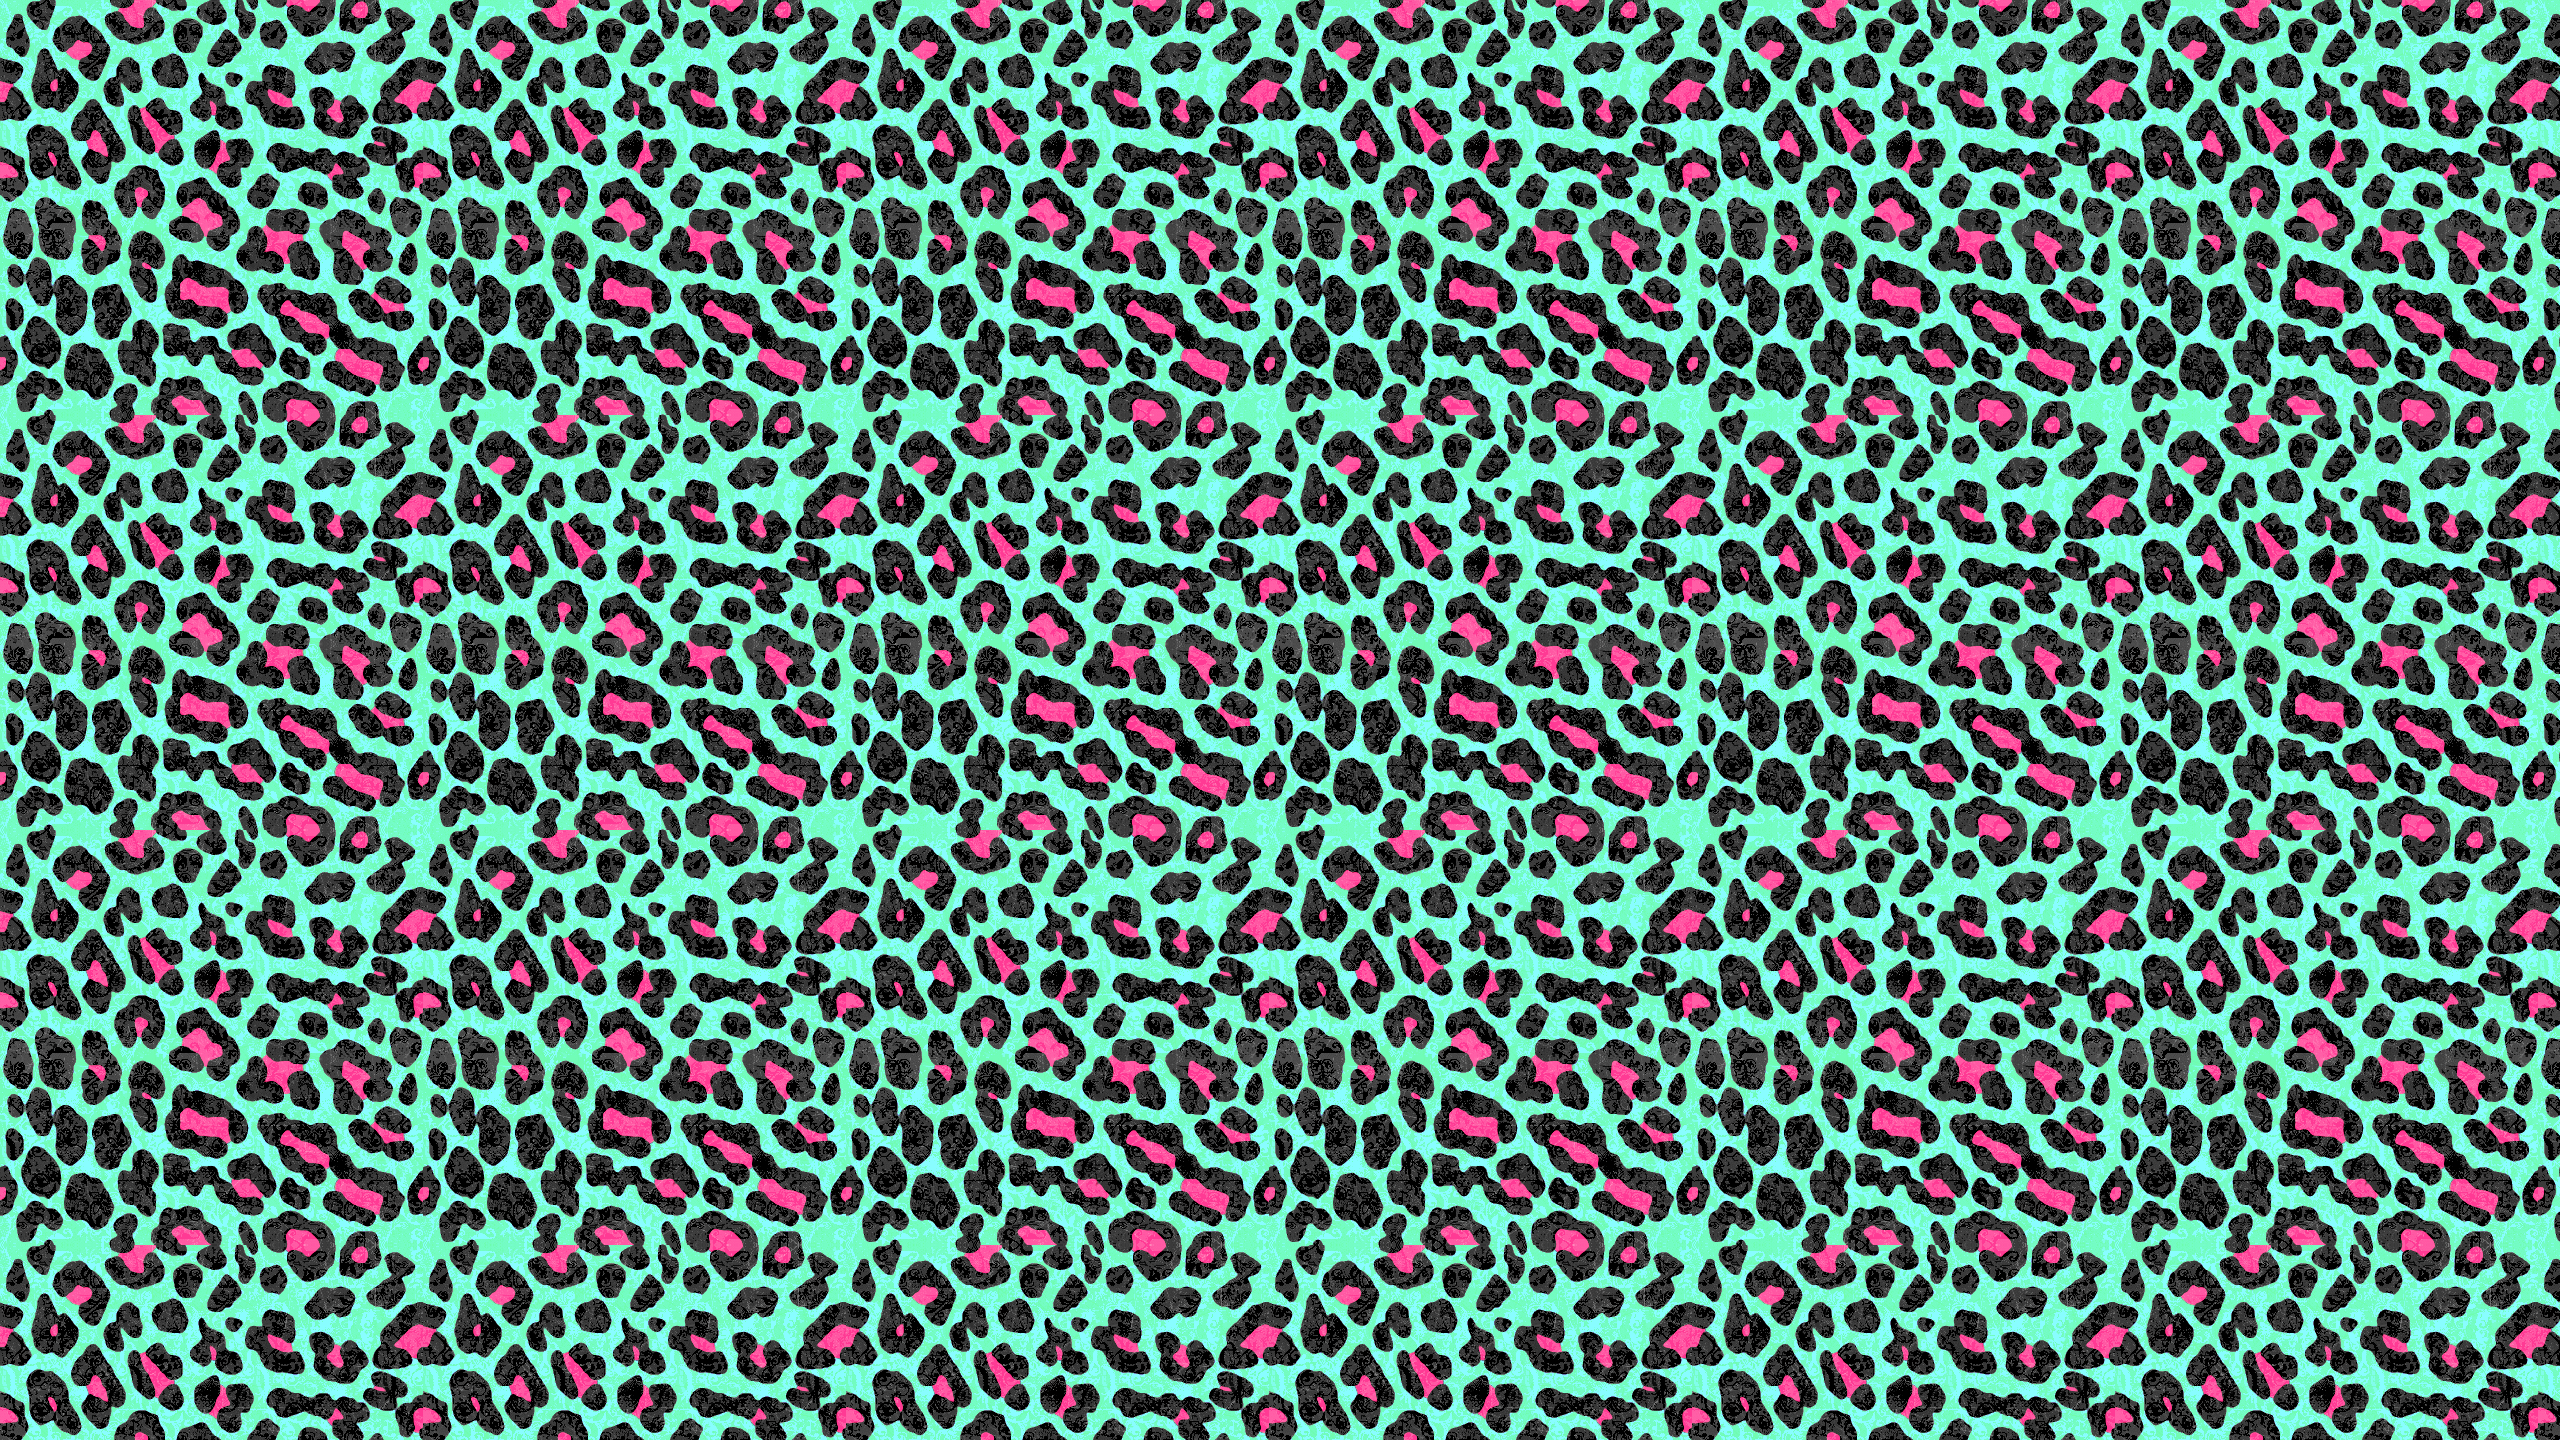 Awesome Picture. Leopard Print HD Widescreen Wallpaper